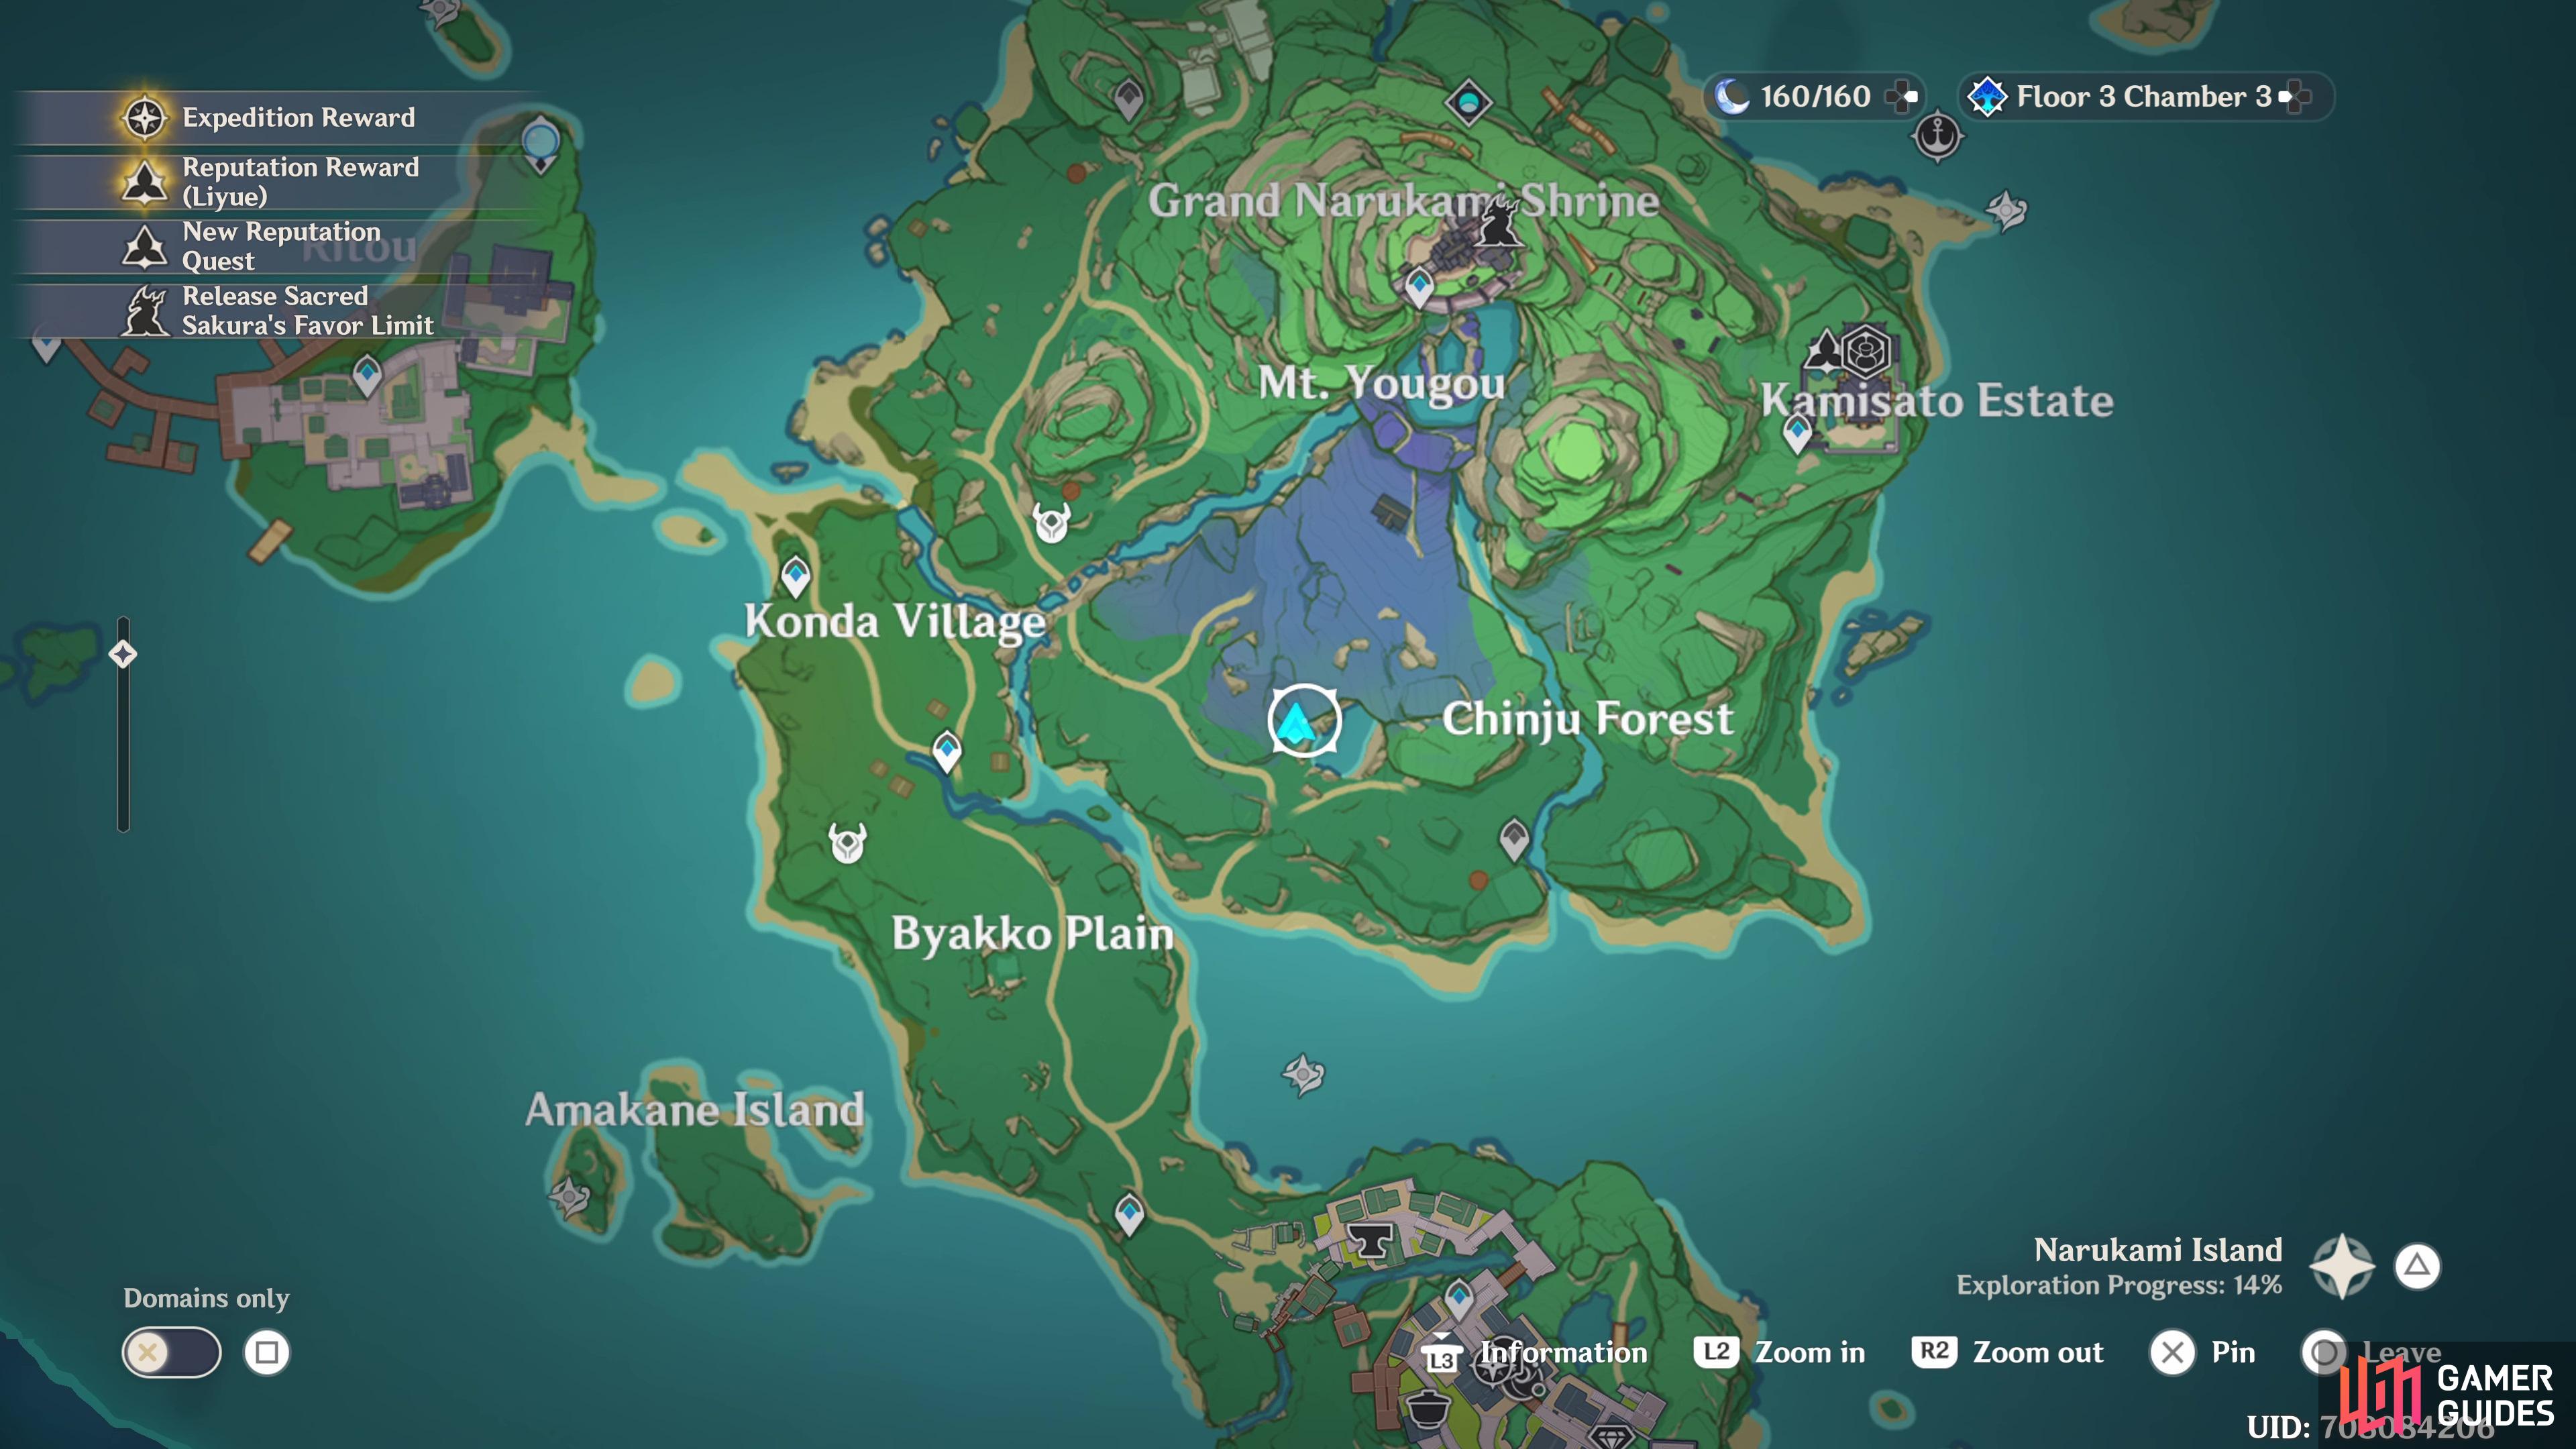 Head to this location on the map to find the shrine 